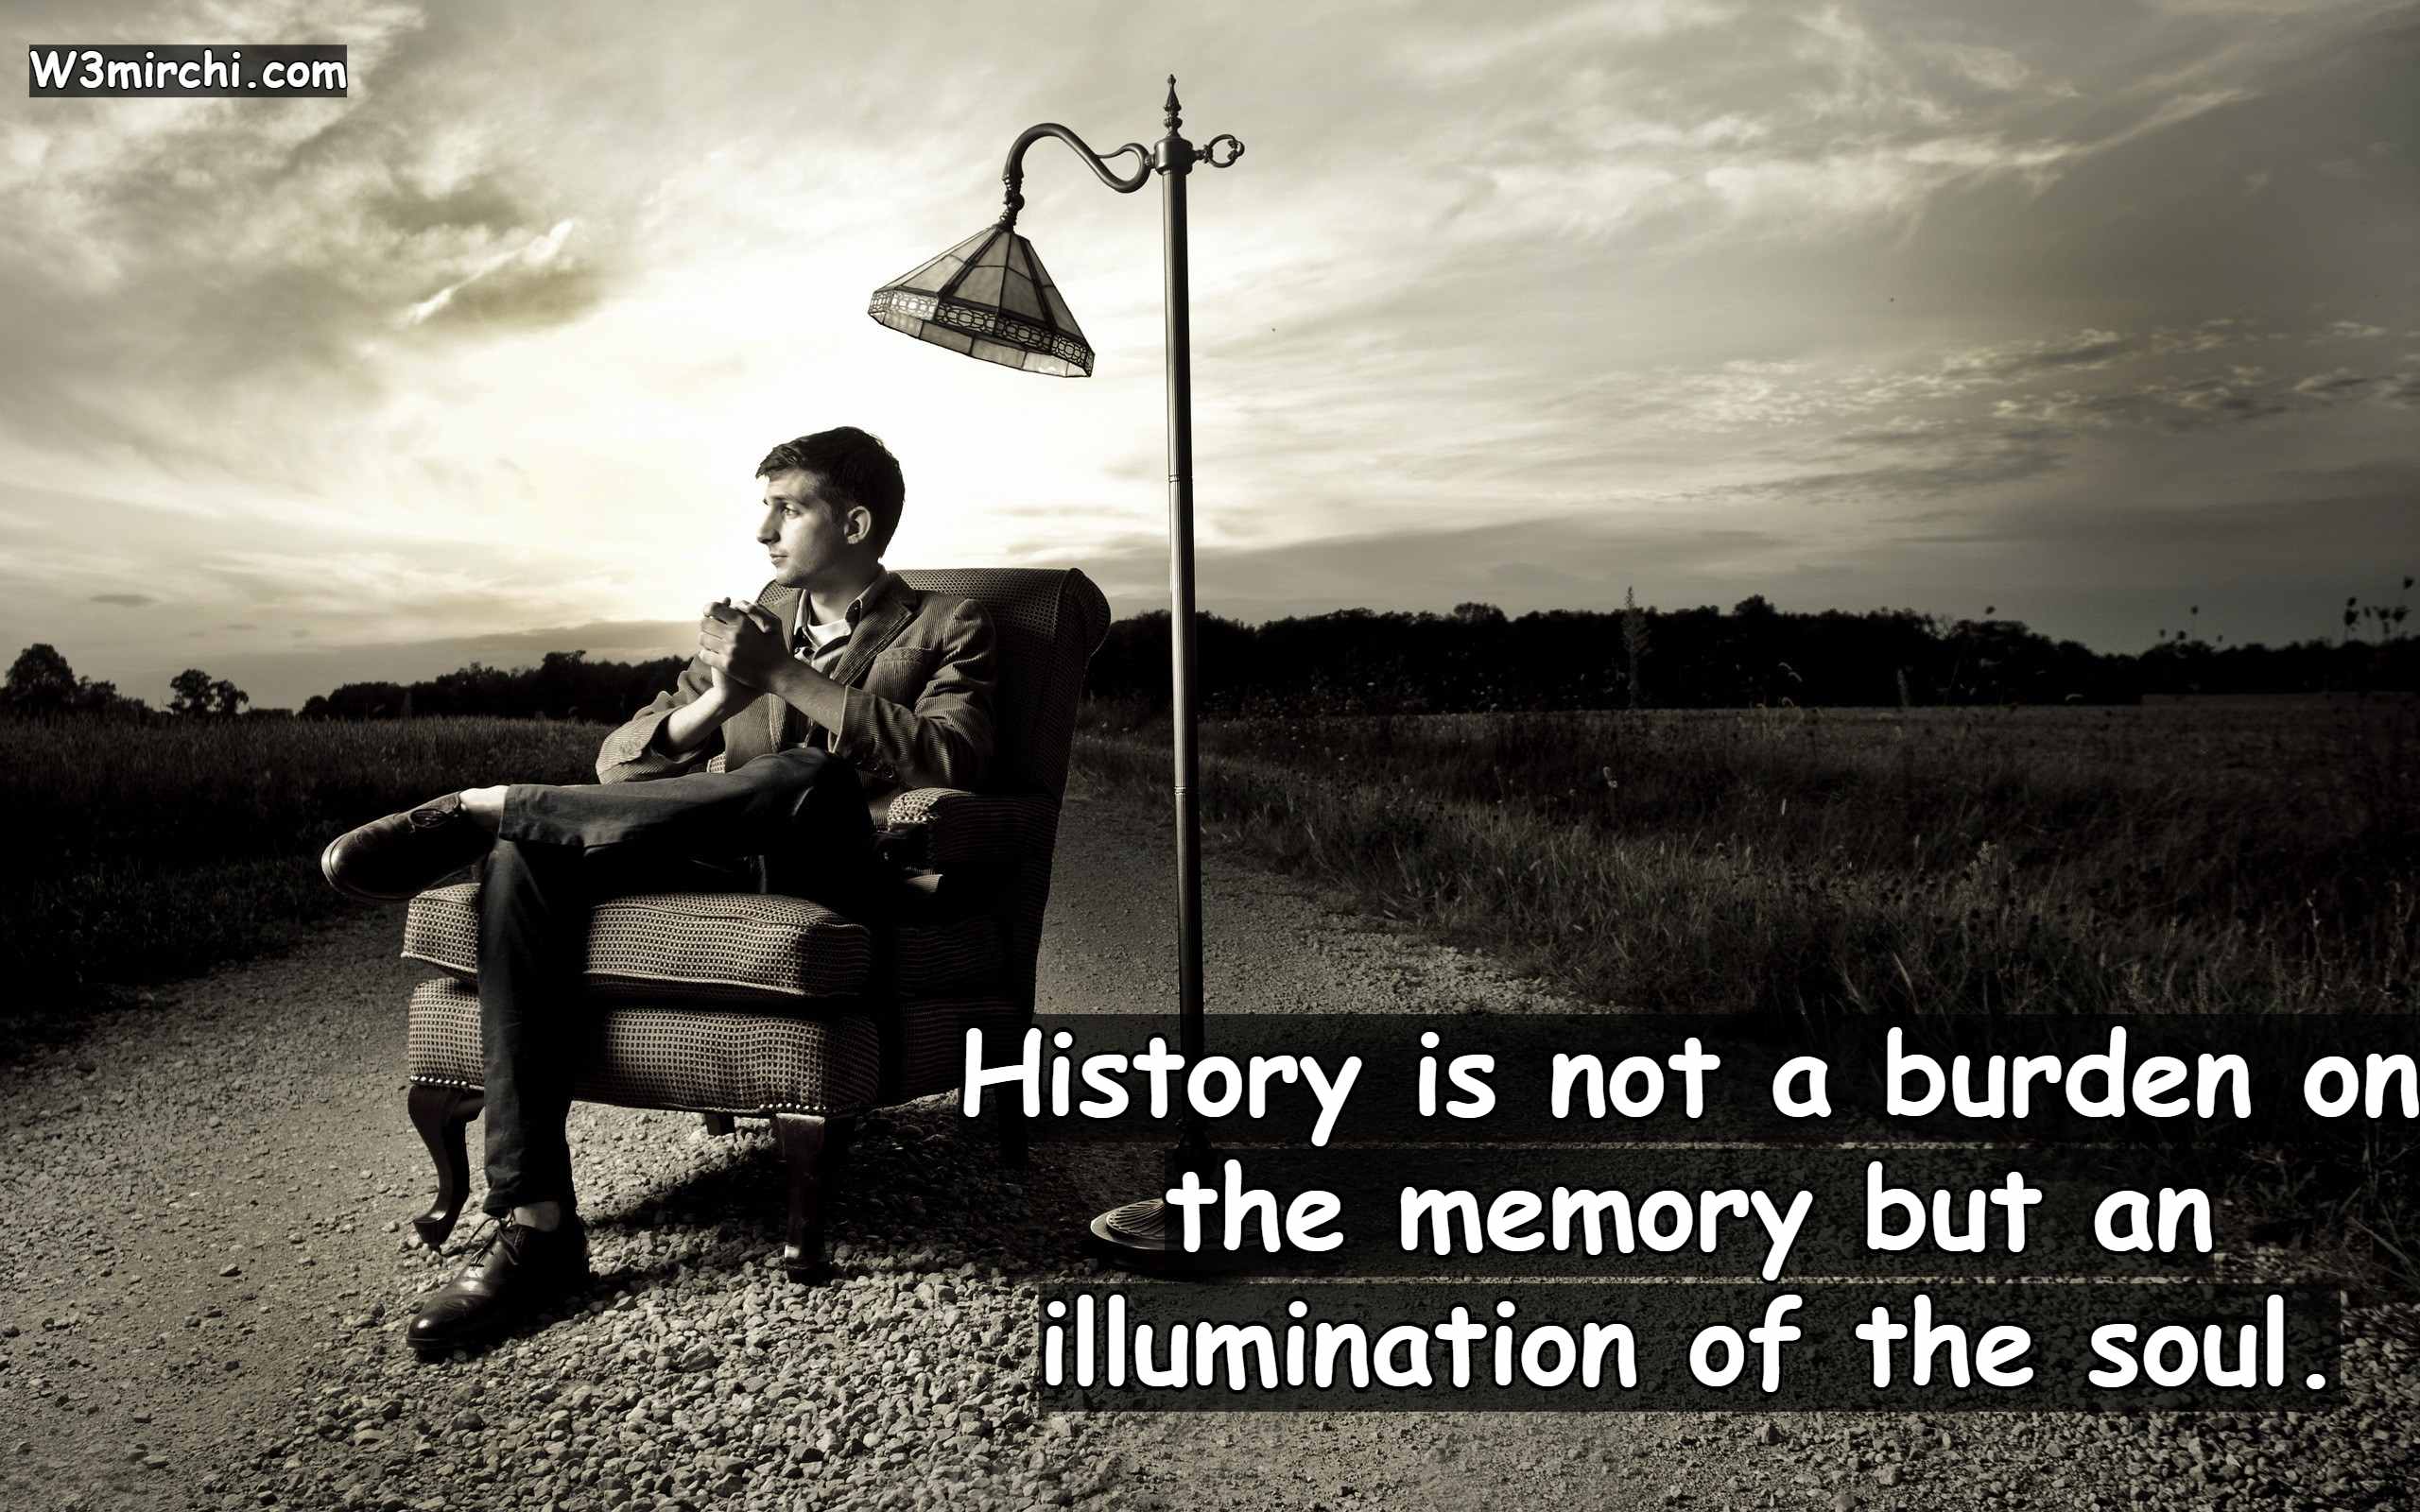 History is not a burden on the memory